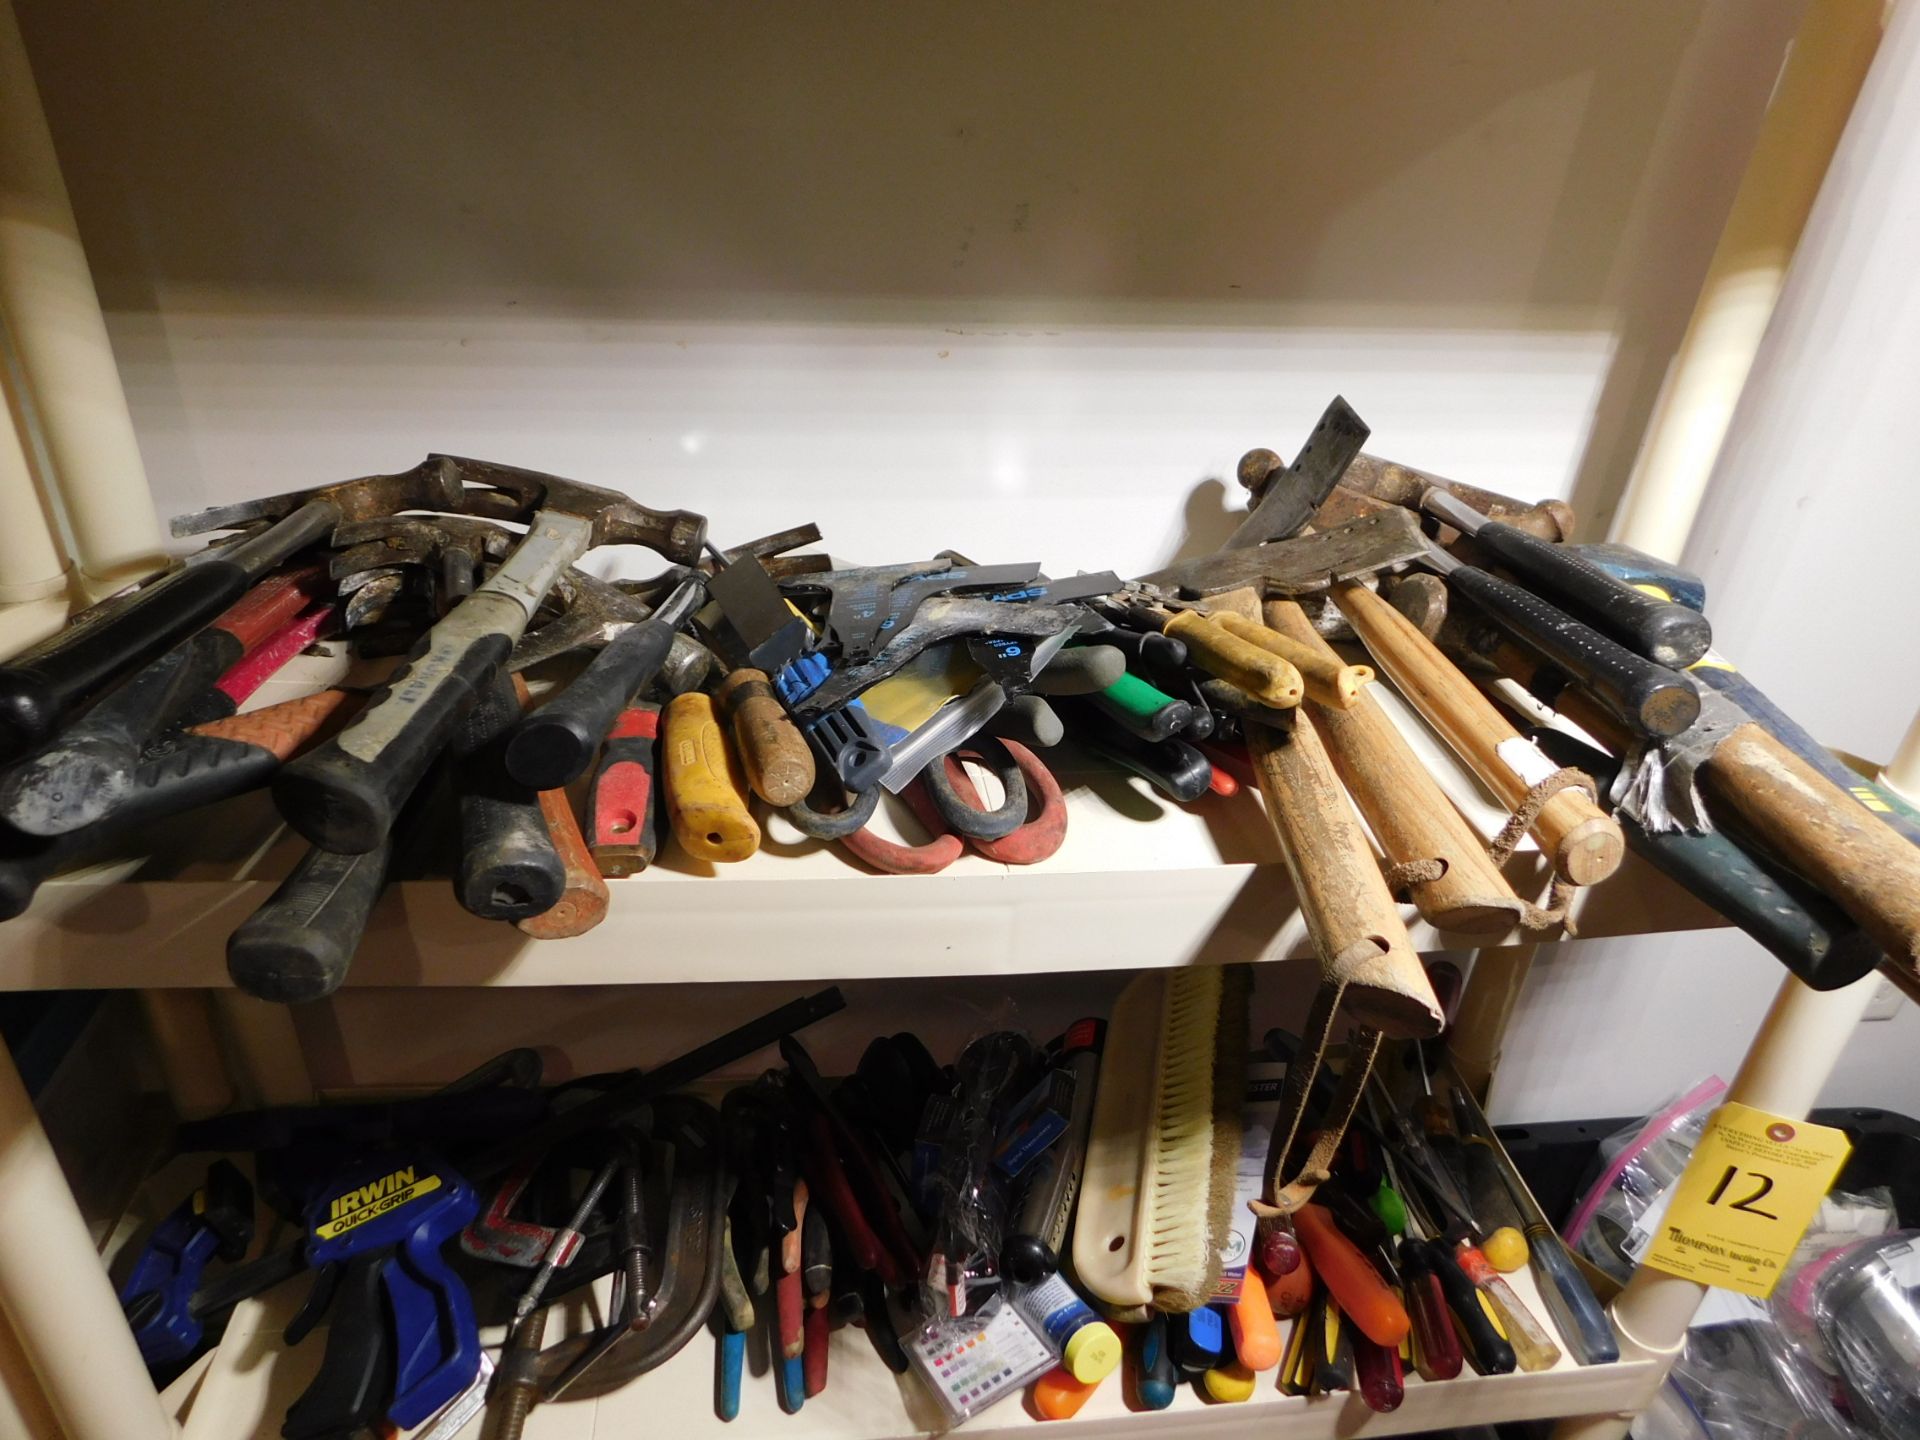 Contents of Shelf, Misc. Hand Tools, Hammers